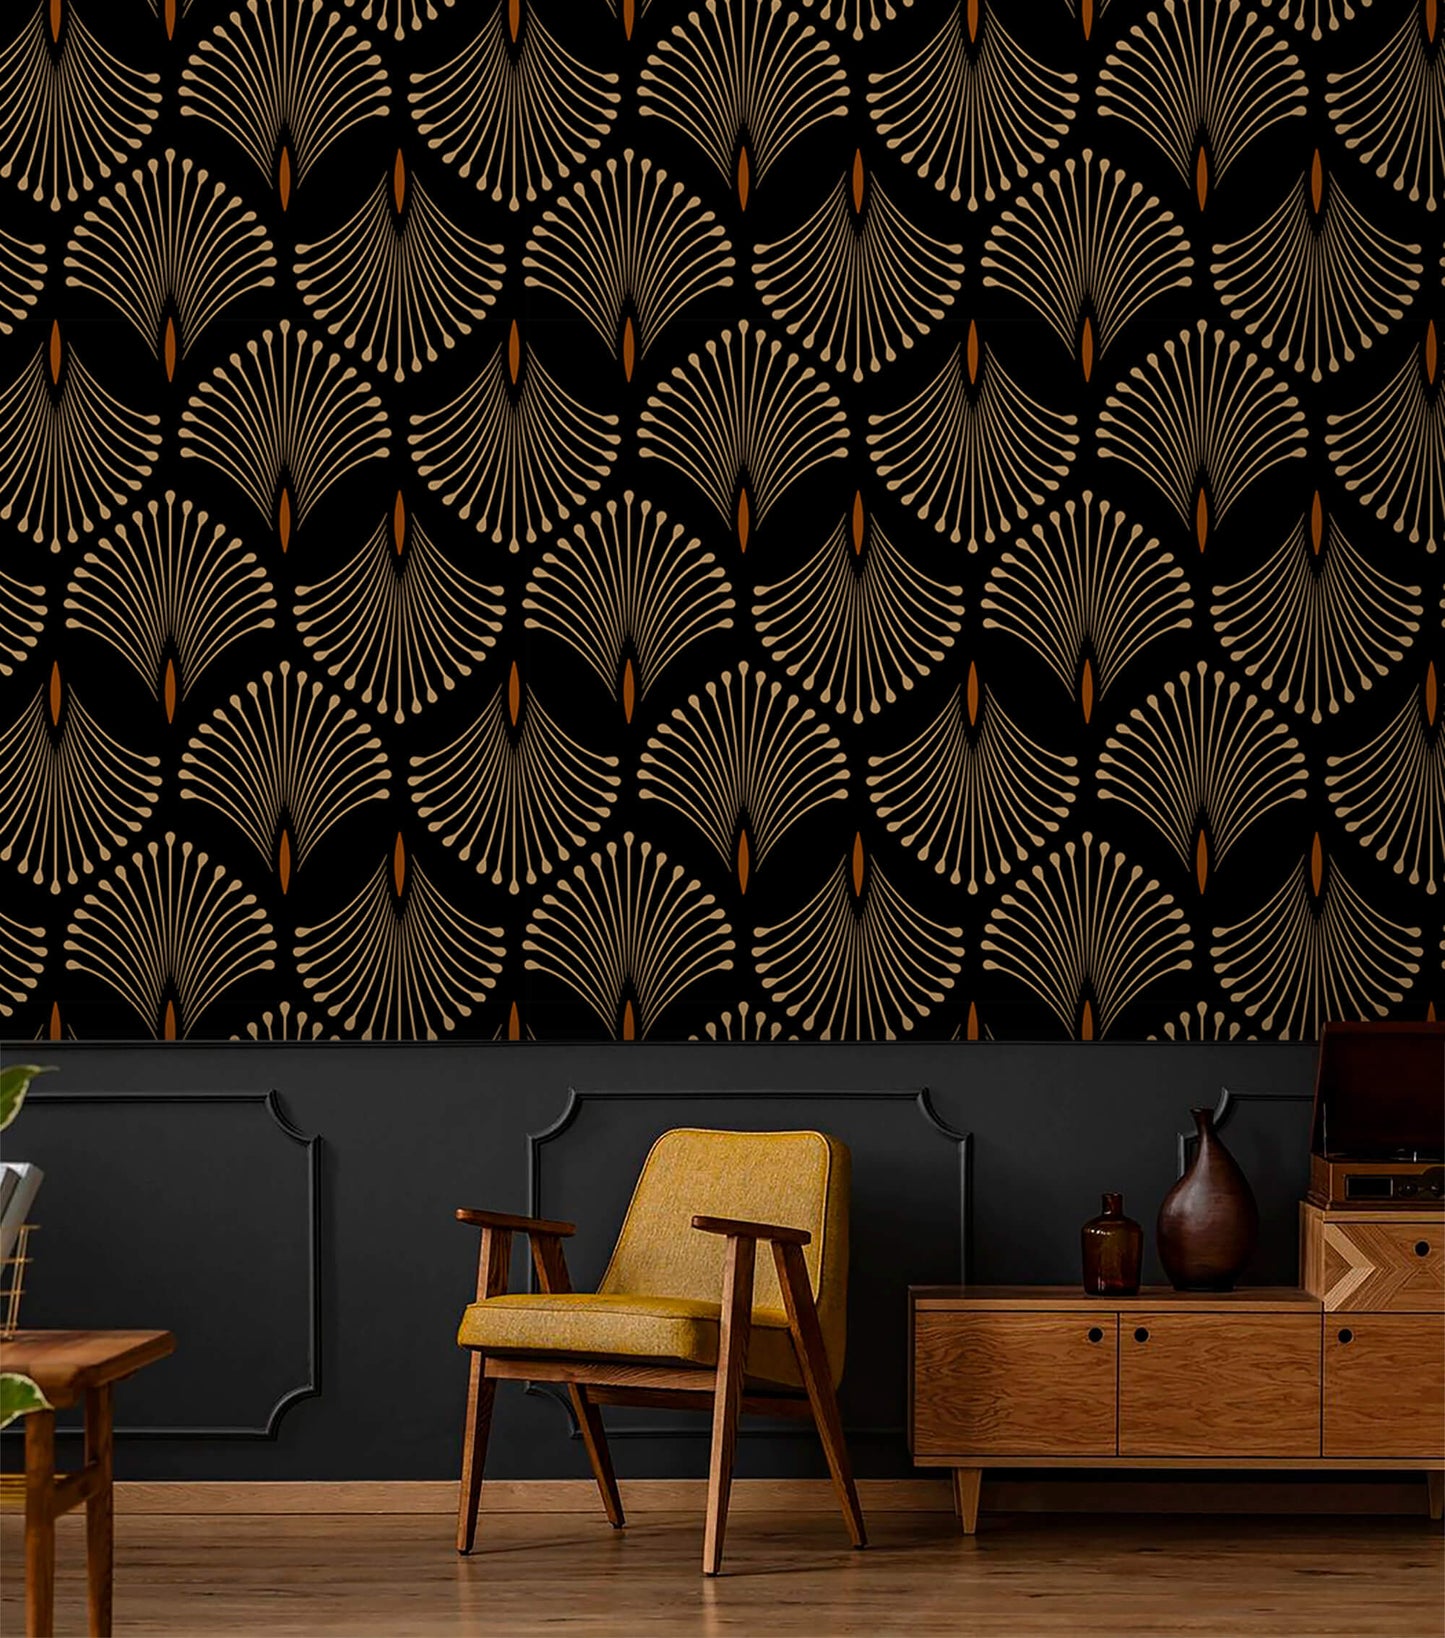 Golden Petal Symphony Art Deco Wallpaper: Elevate your space with opulent elegance using this sophisticated design, where golden petals dance in an Art Deco-inspired symphony, adding a touch of glamour and luxury to any room.